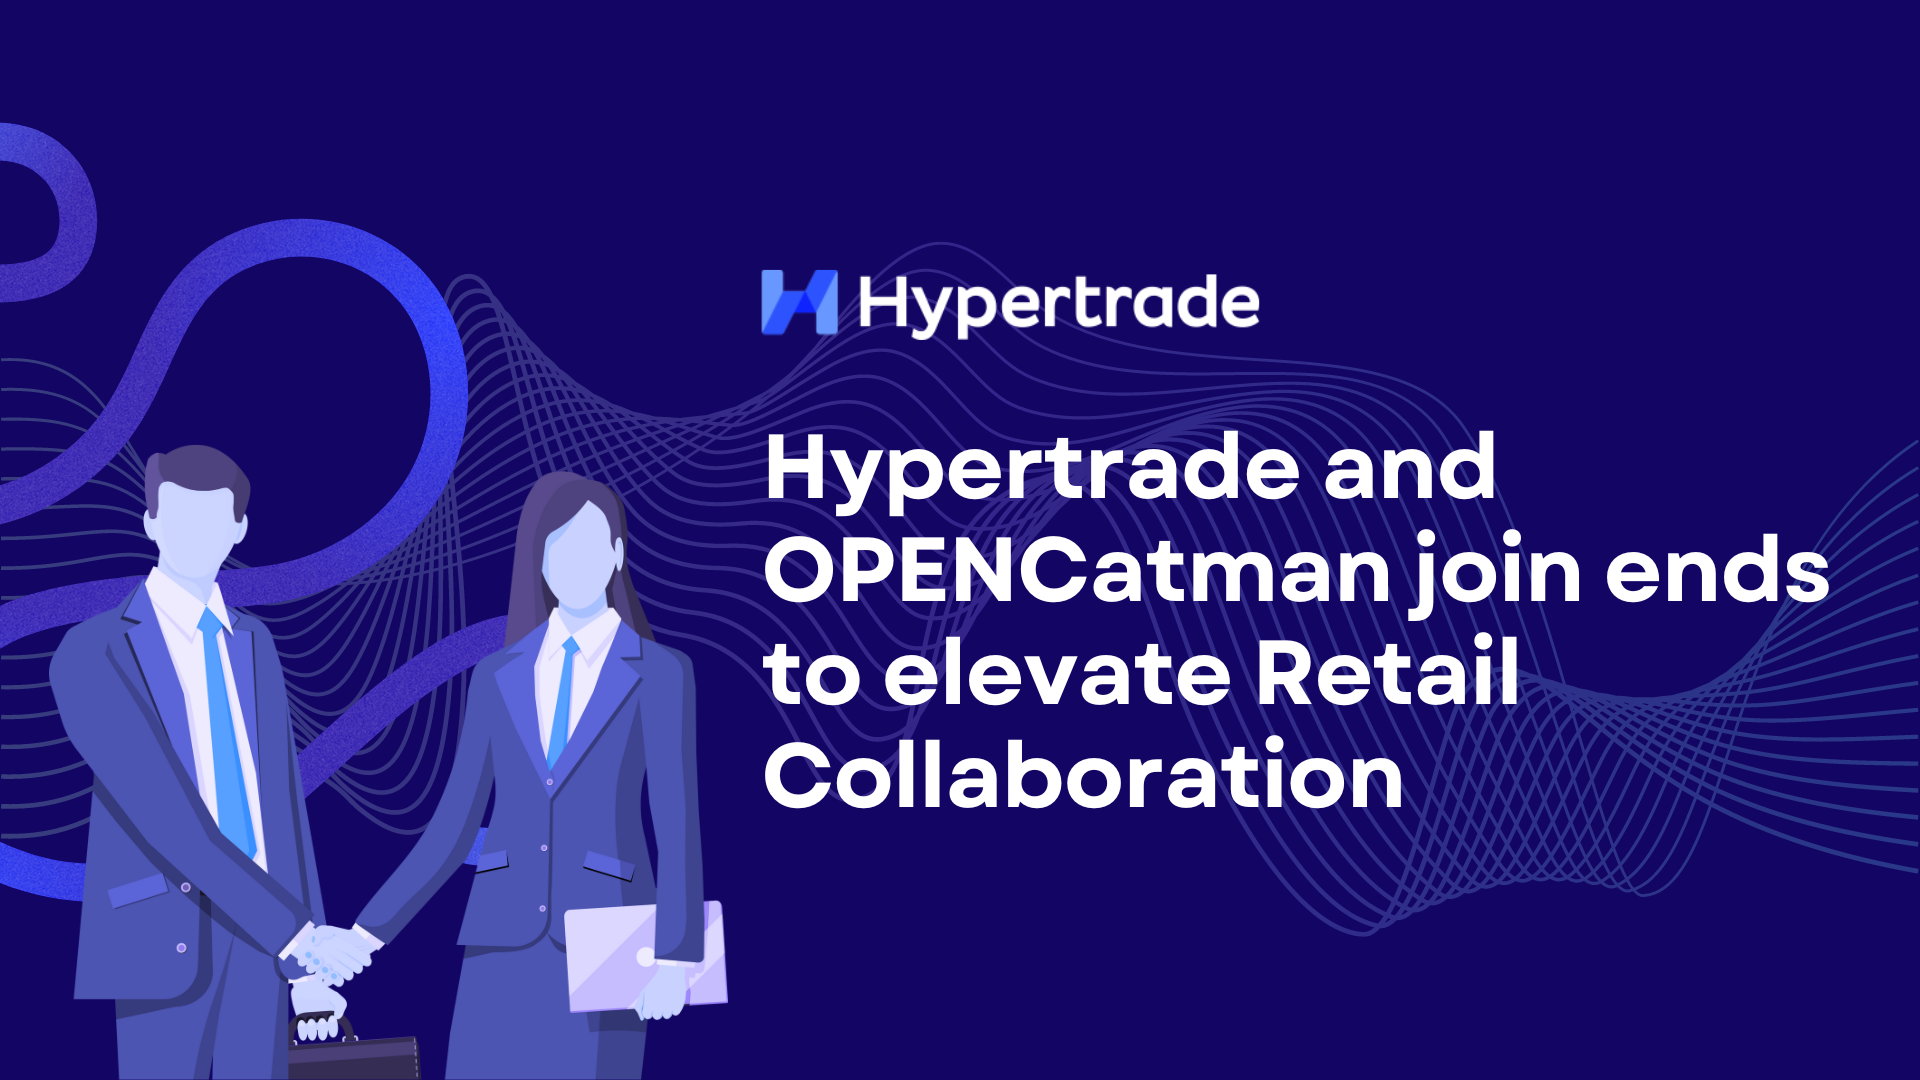 Hypertrade and OPENCatman join ends to elevate Retail Collaboration